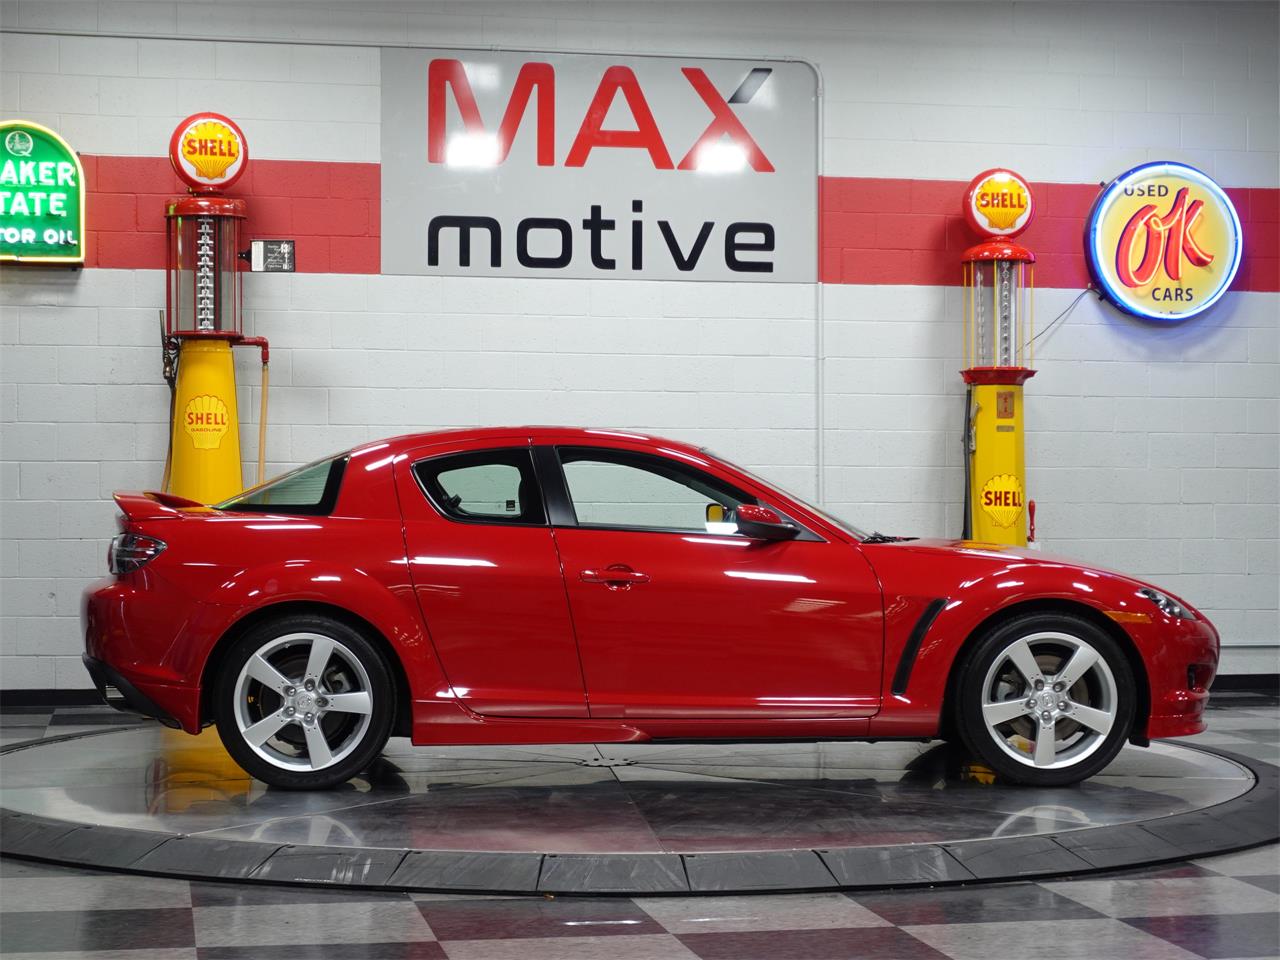 2006 mazda rx-8 grand touring, Pick of the Day: 2006 Mazda RX-8 Grand Touring, ClassicCars.com Journal